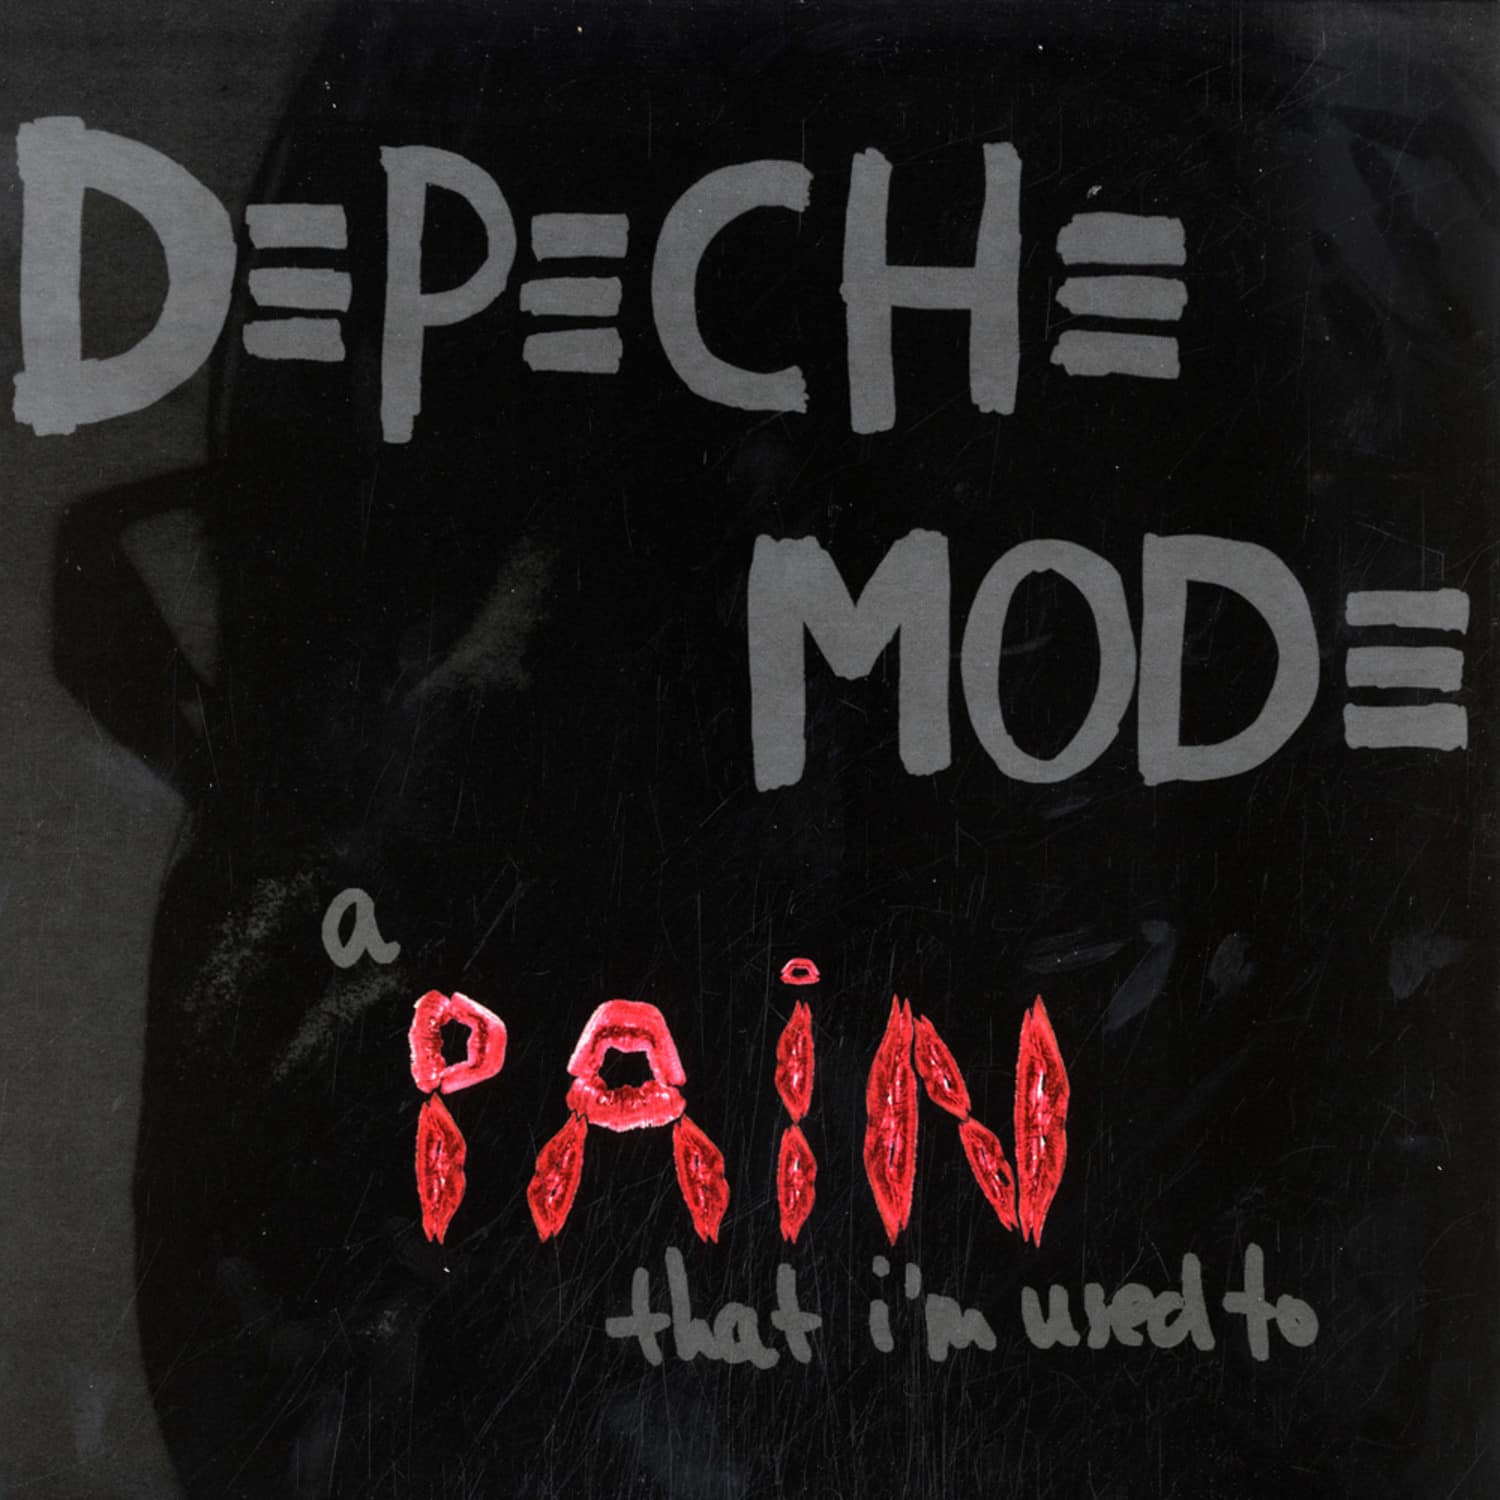 Depeche Mode - A PAIN THAT IM USED TO DISC 1